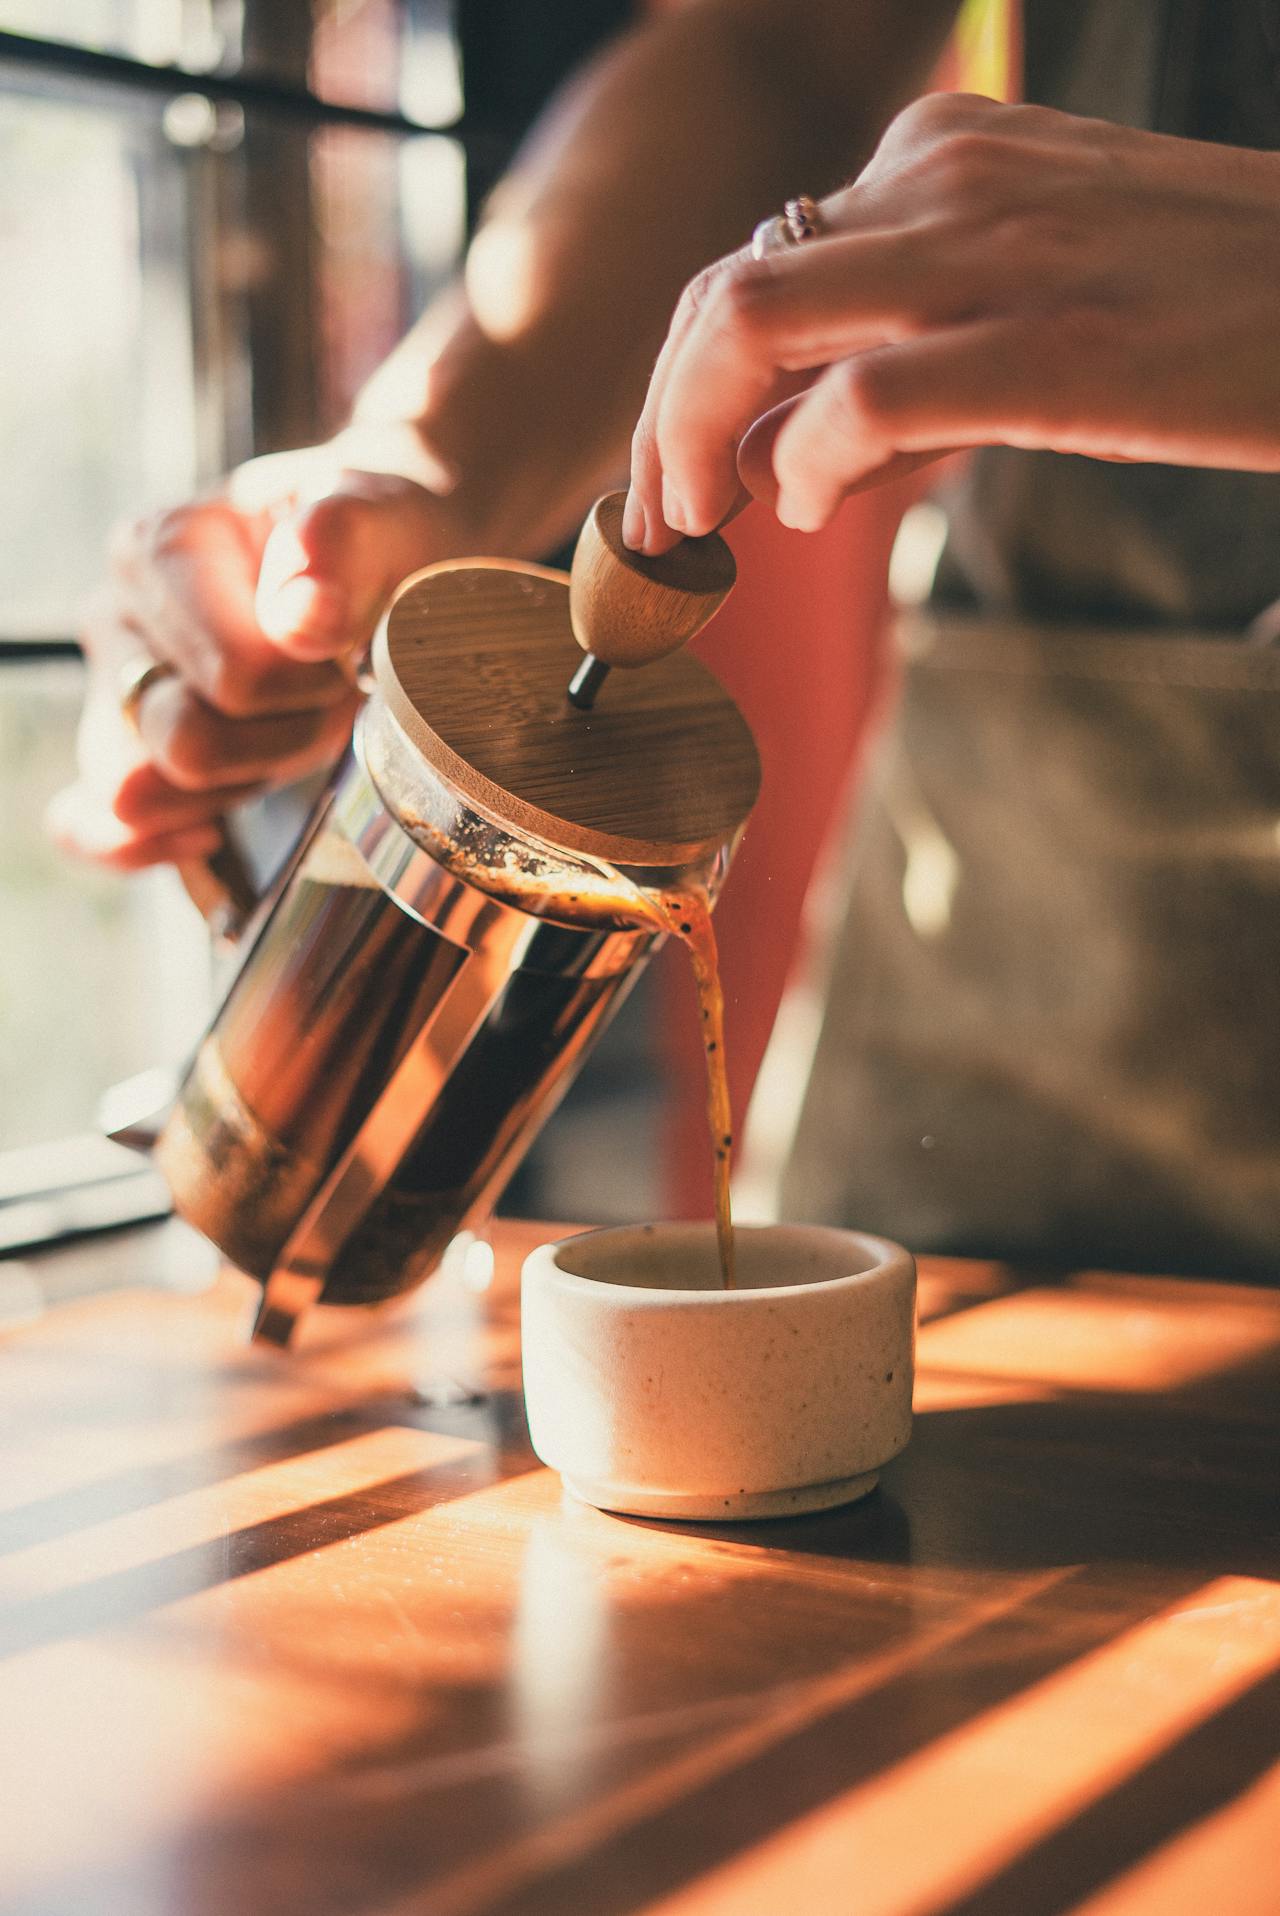 Hands holding French press at 45 degree angle, pouring coffee into small stone cup with light shining through a window in the background.